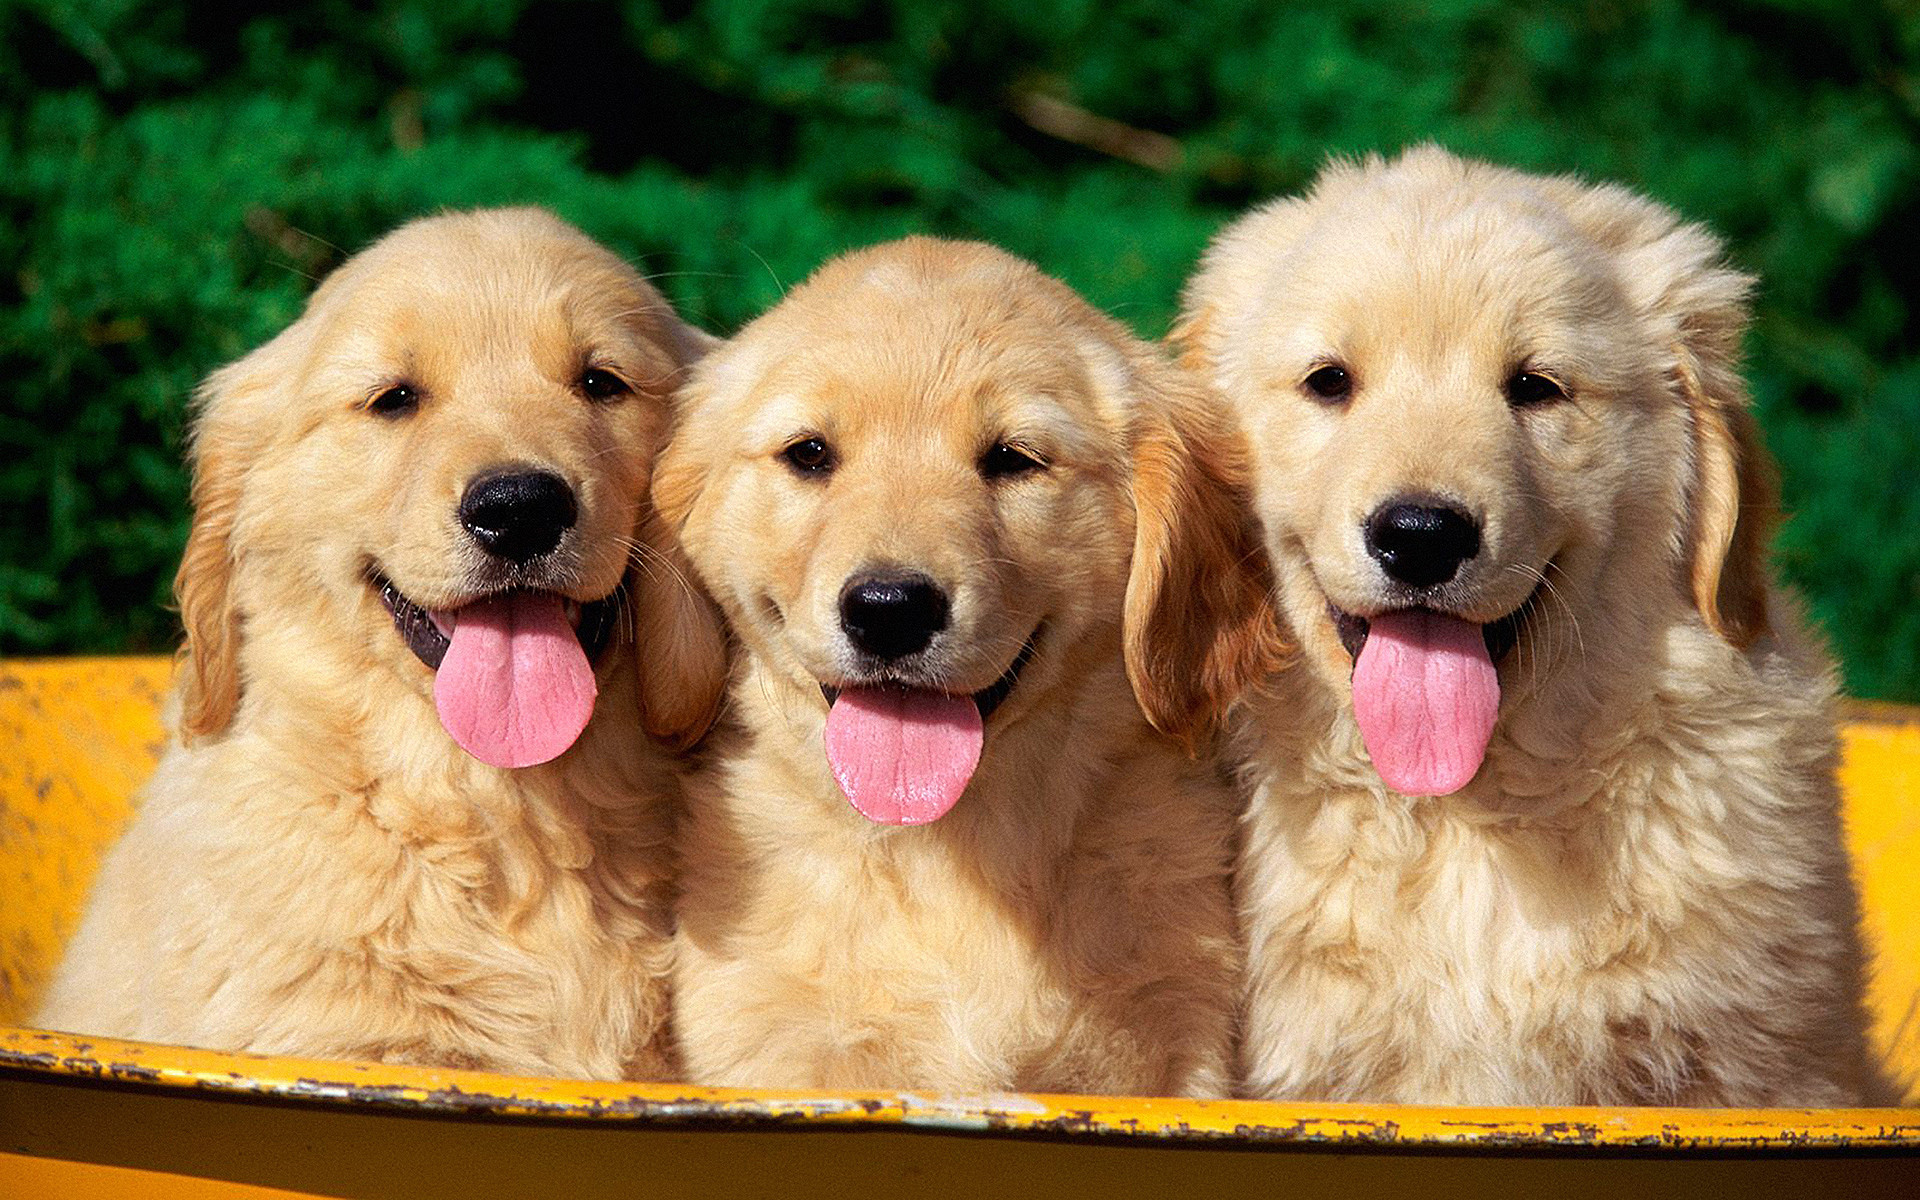 1920x1200 Lovely Golden Retriever Puppies In The Basket Photo And Wallpaper With  Puppy Golden Retriever Wallpaper